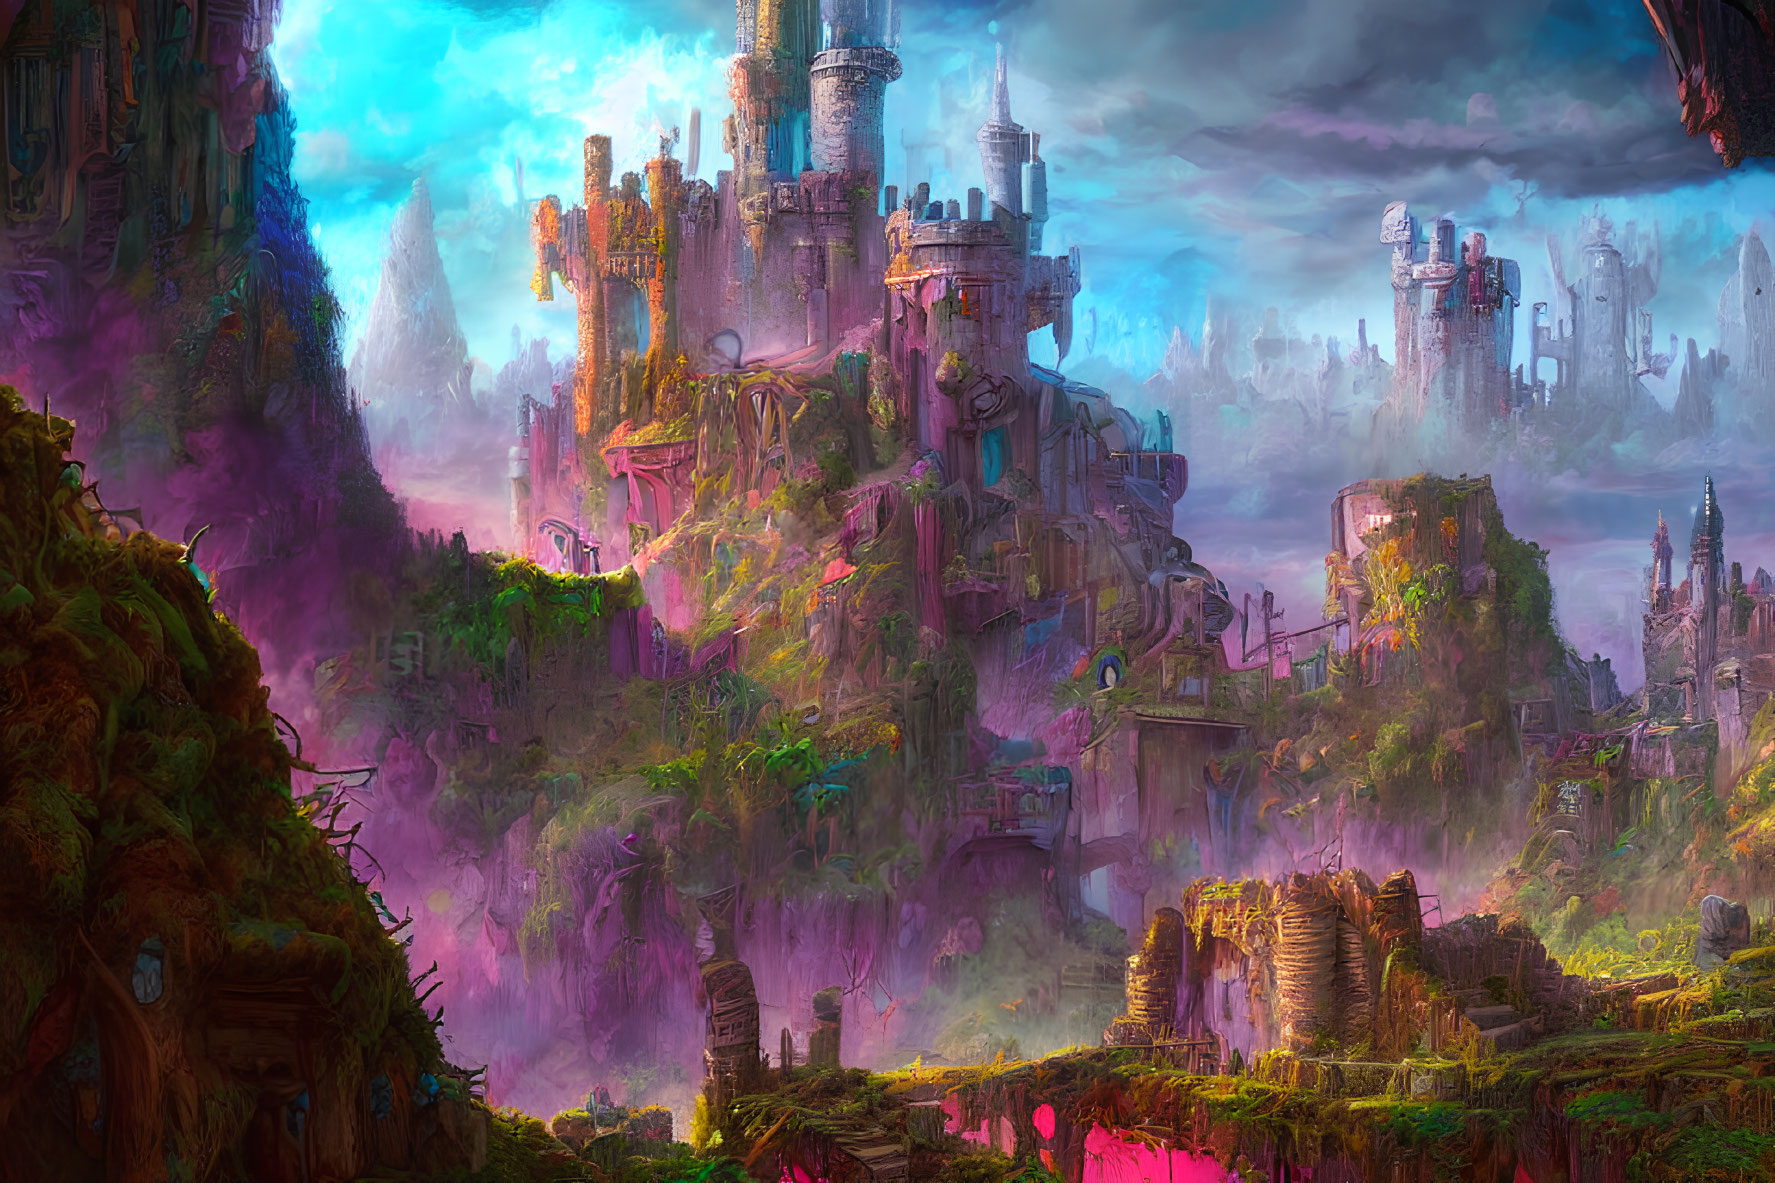 Fantasy landscape with towering castles and pinkish sky